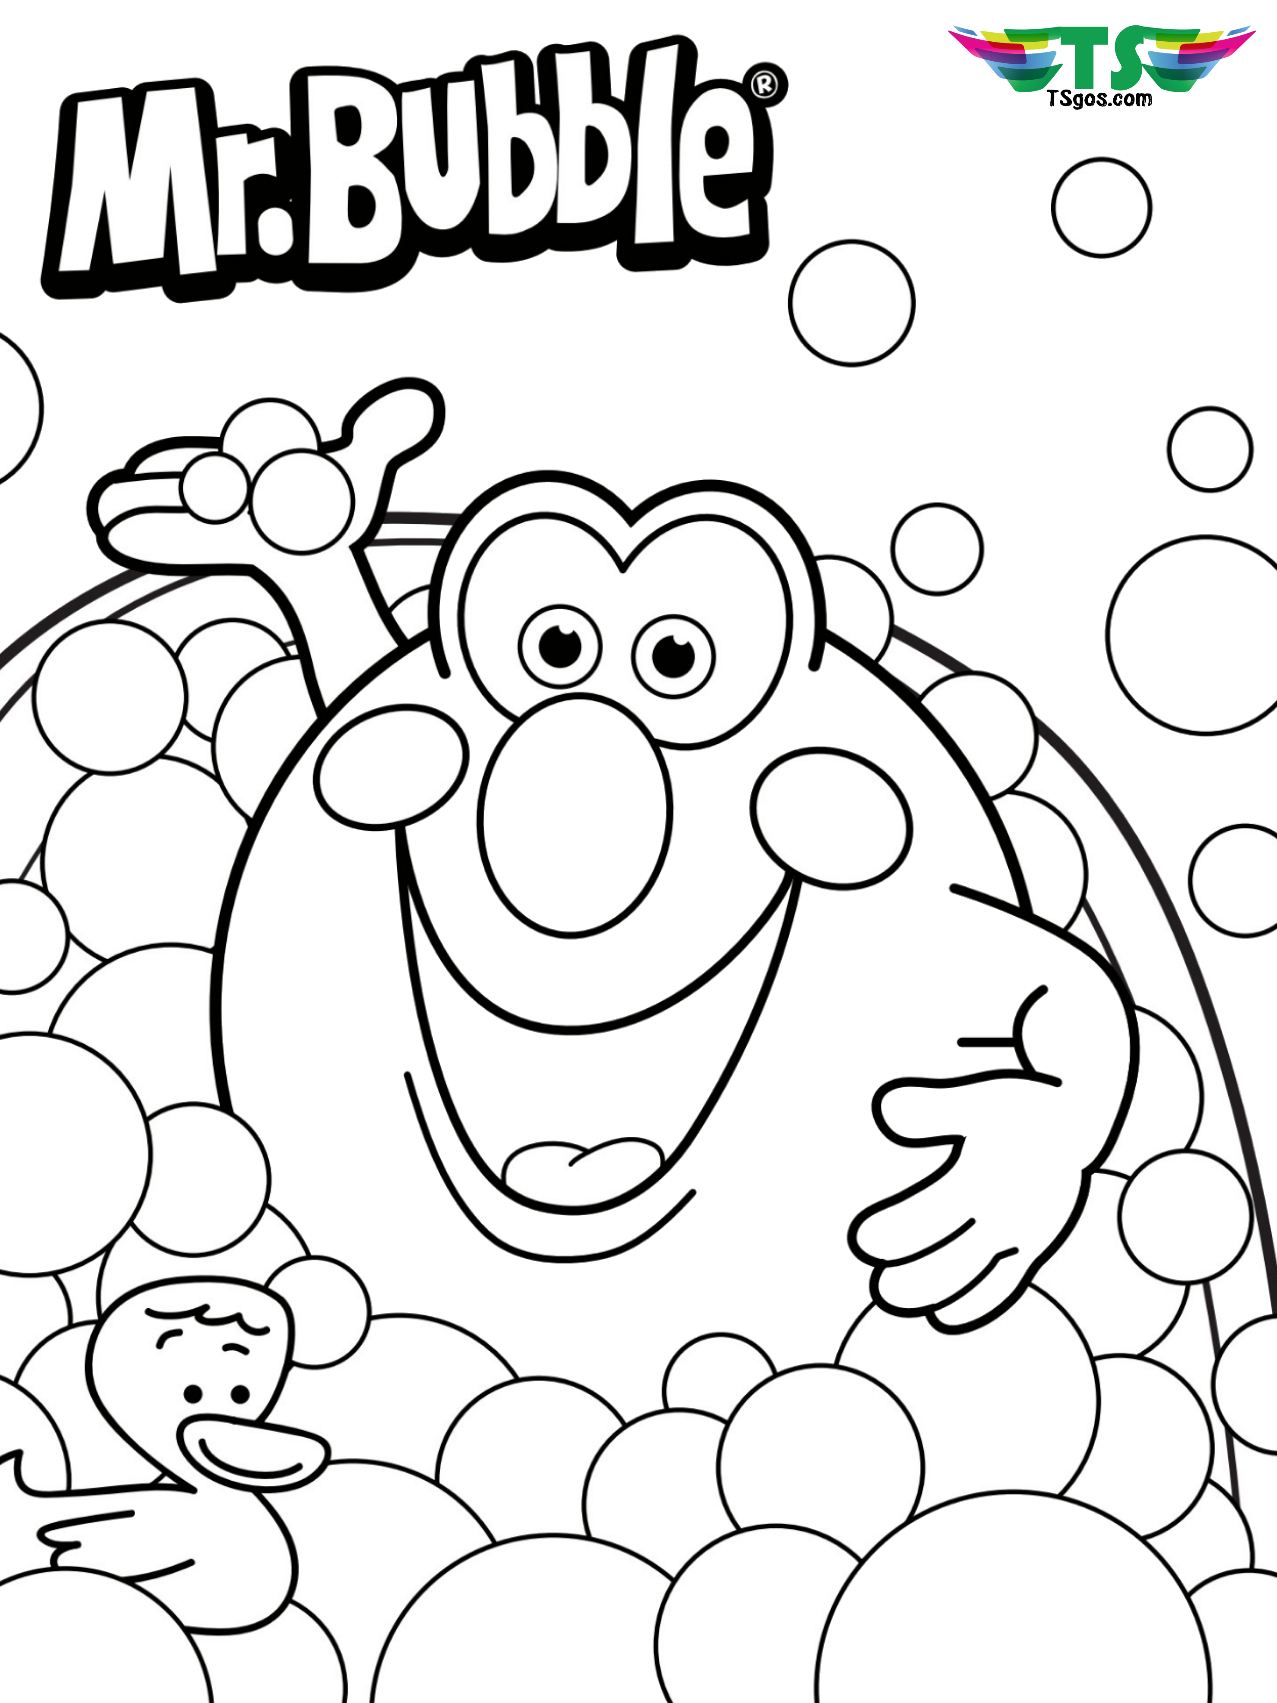 Mr bubble coloring page for toddlers Wallpaper